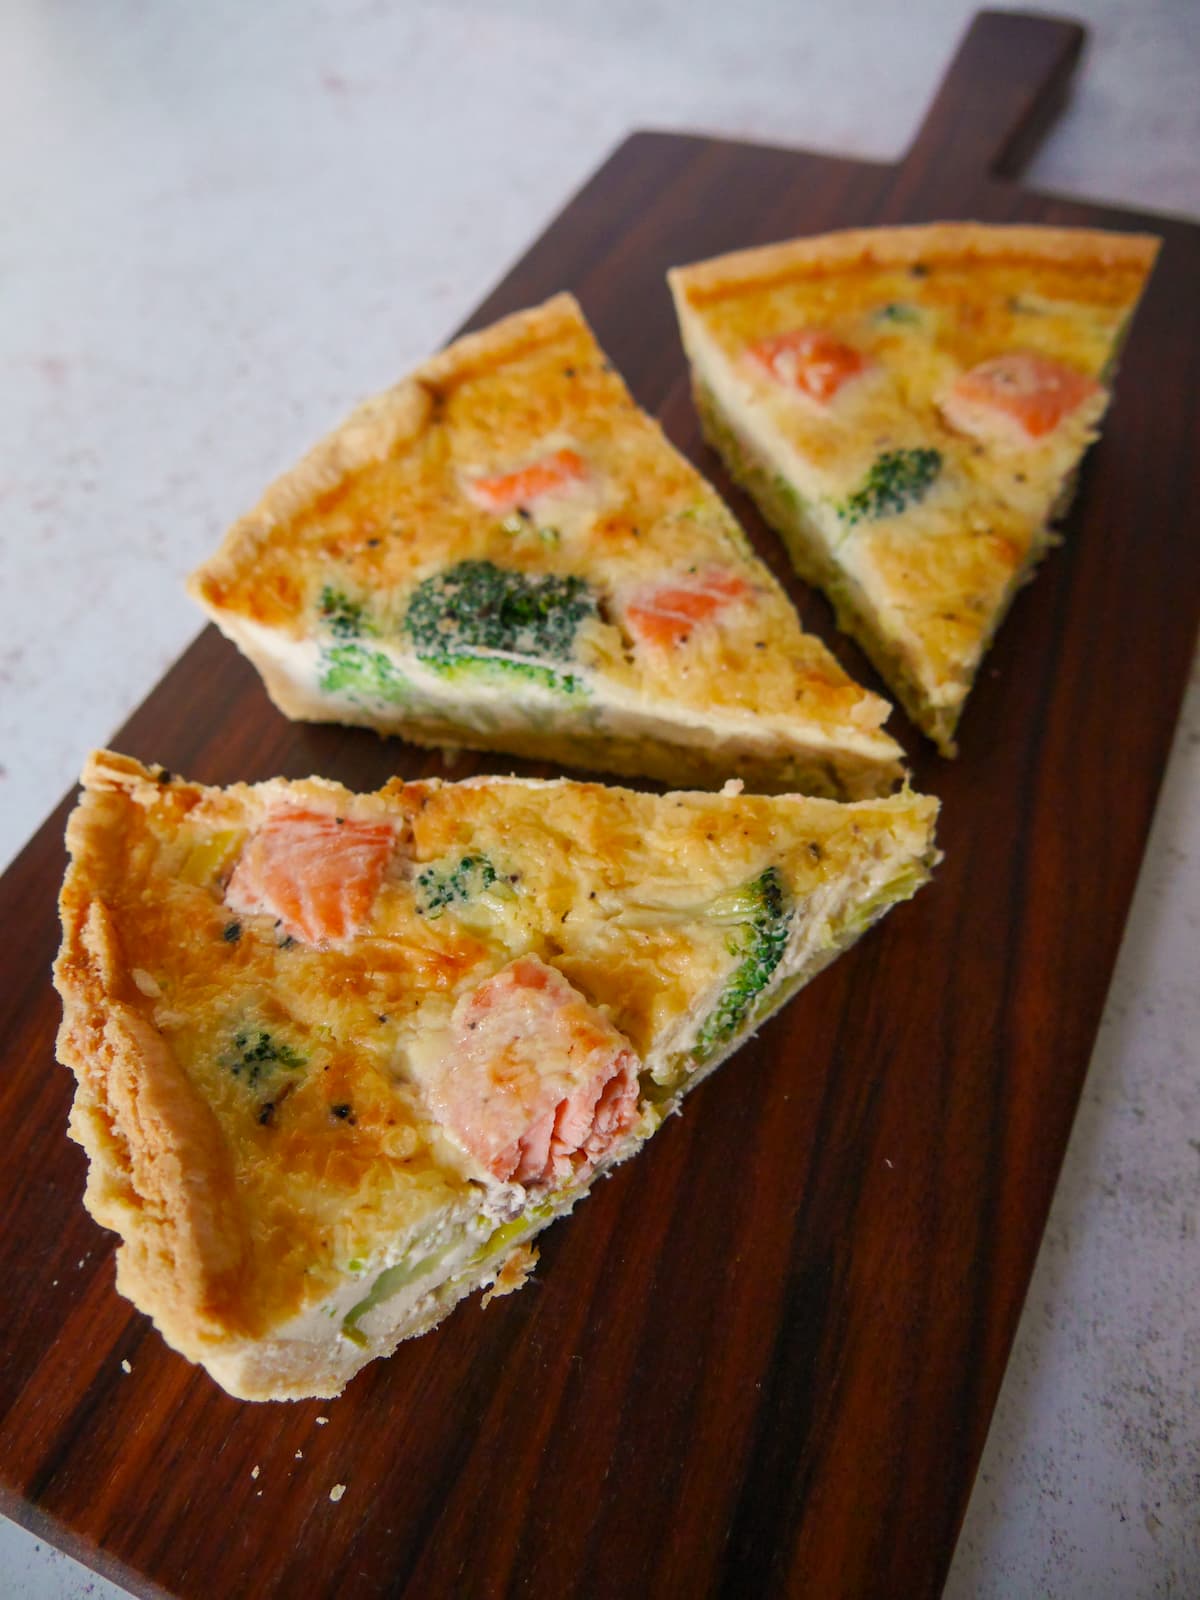 Three wedges of salmon and broccoli tart set on a wooden platter.